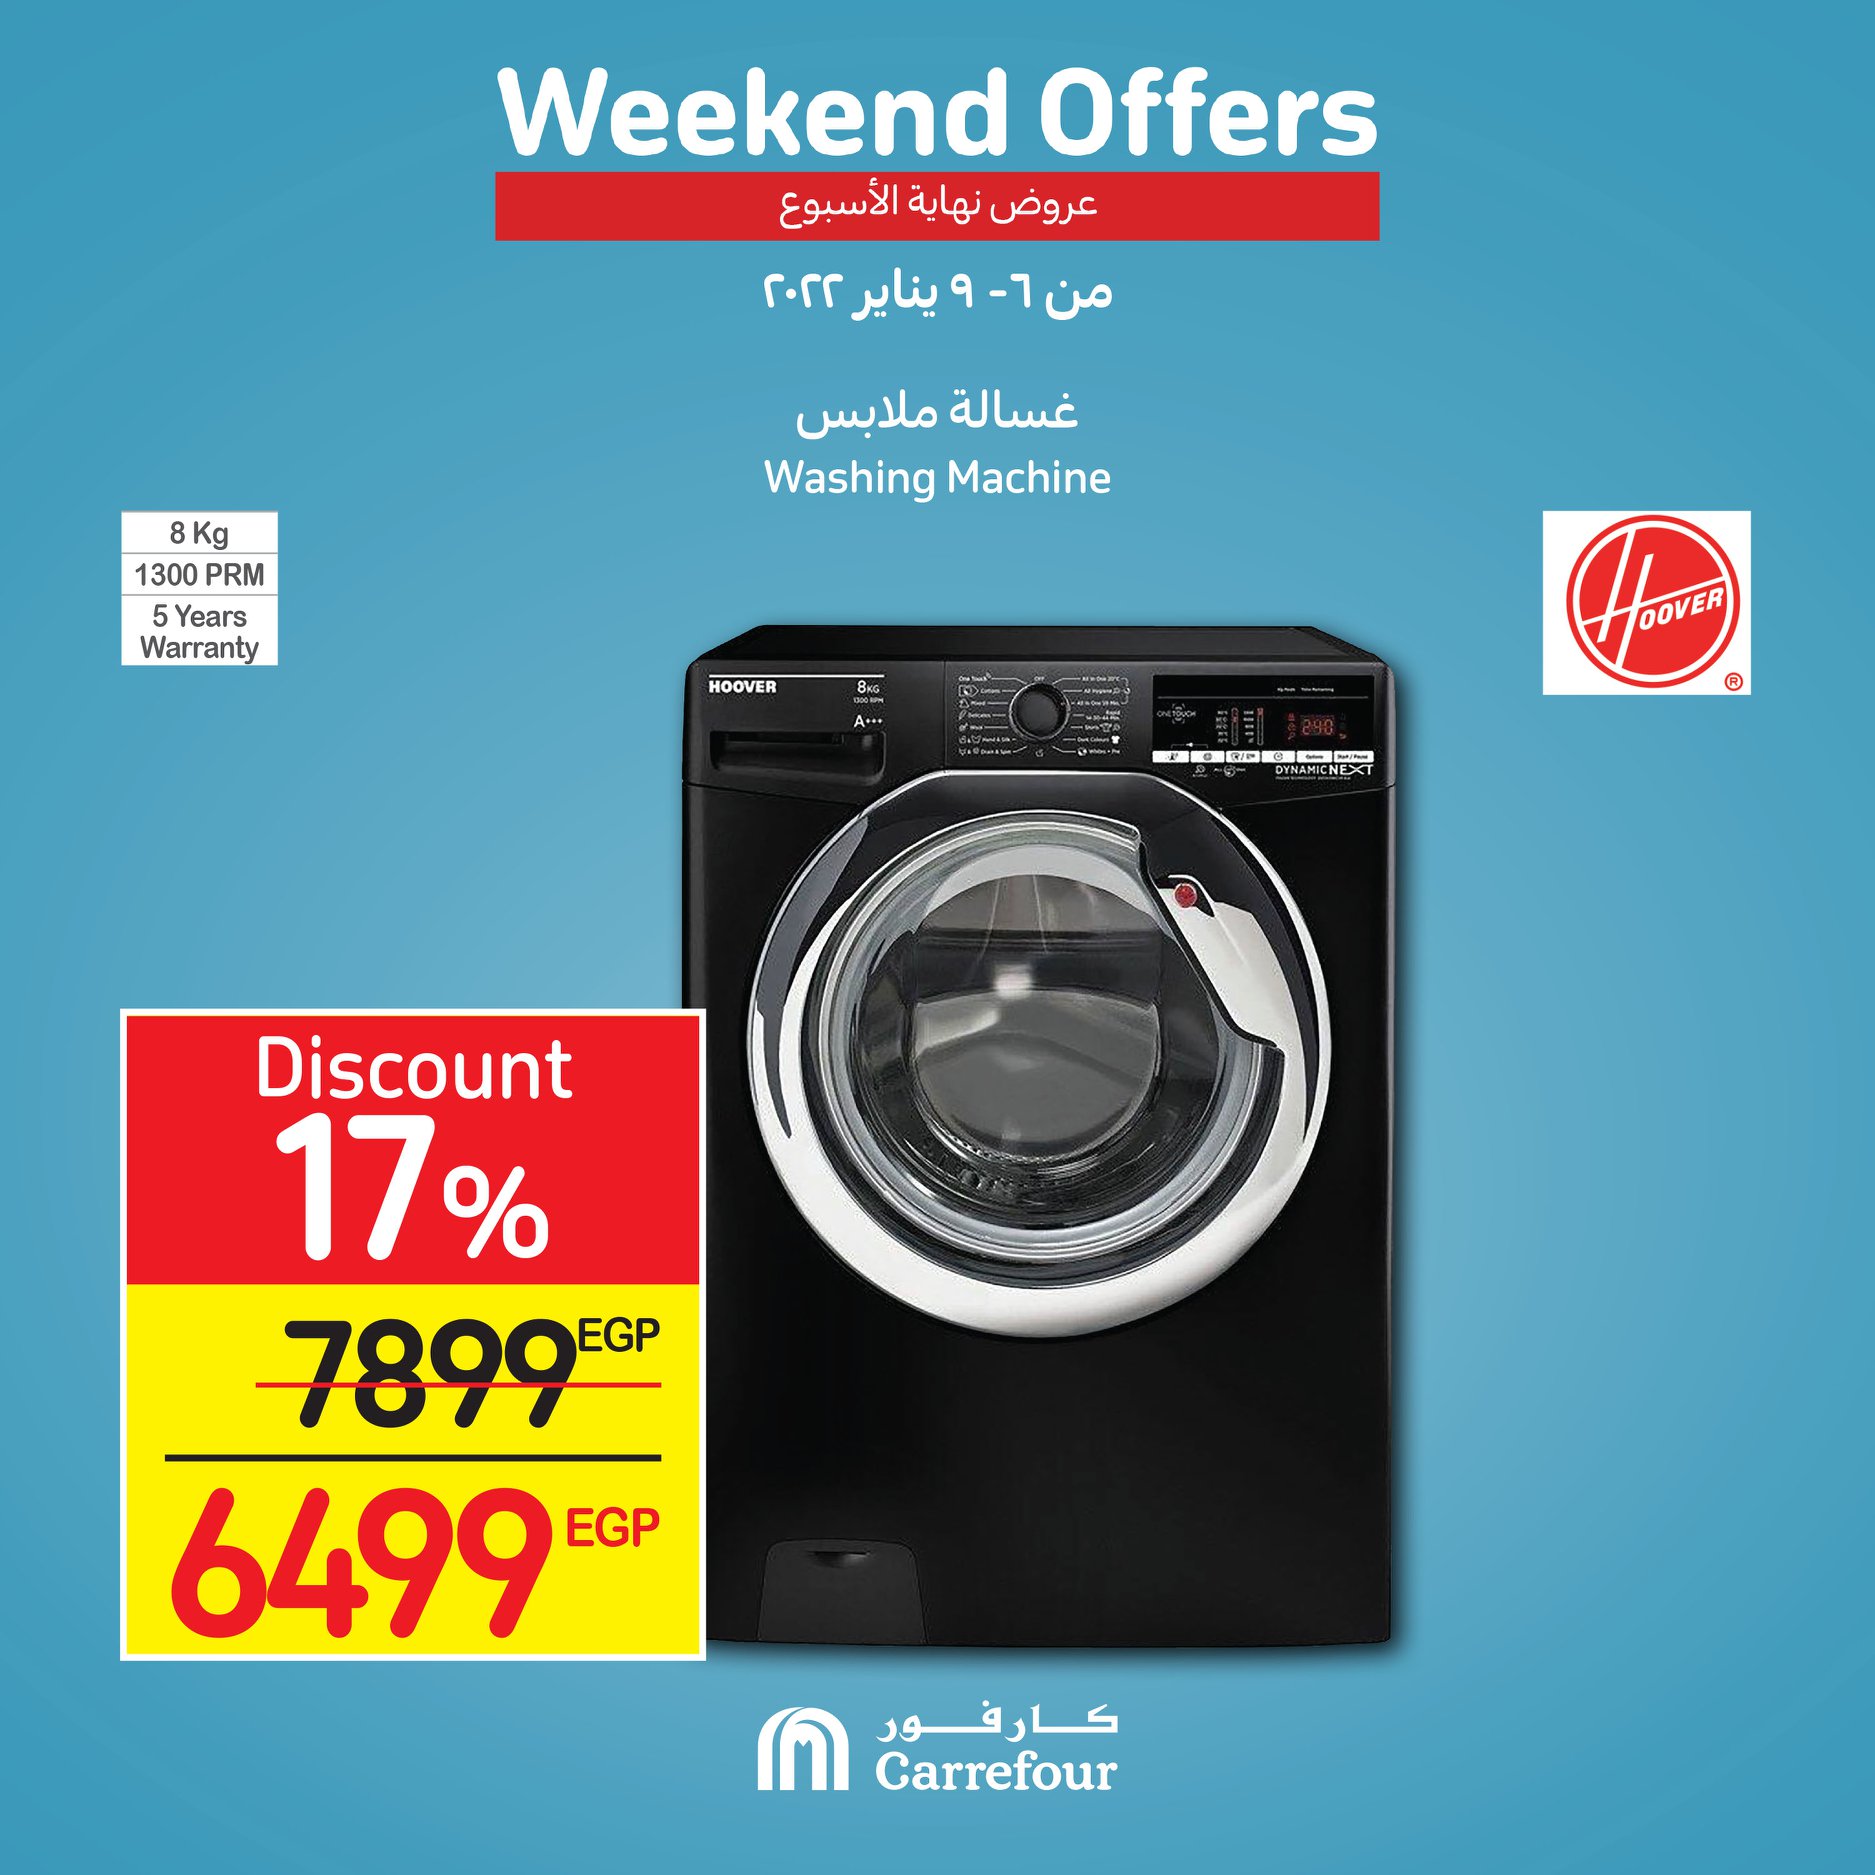 Now, the strongest offers and surprises from Carrefour, half-price discounts, at Weekend, until January 16th, 12